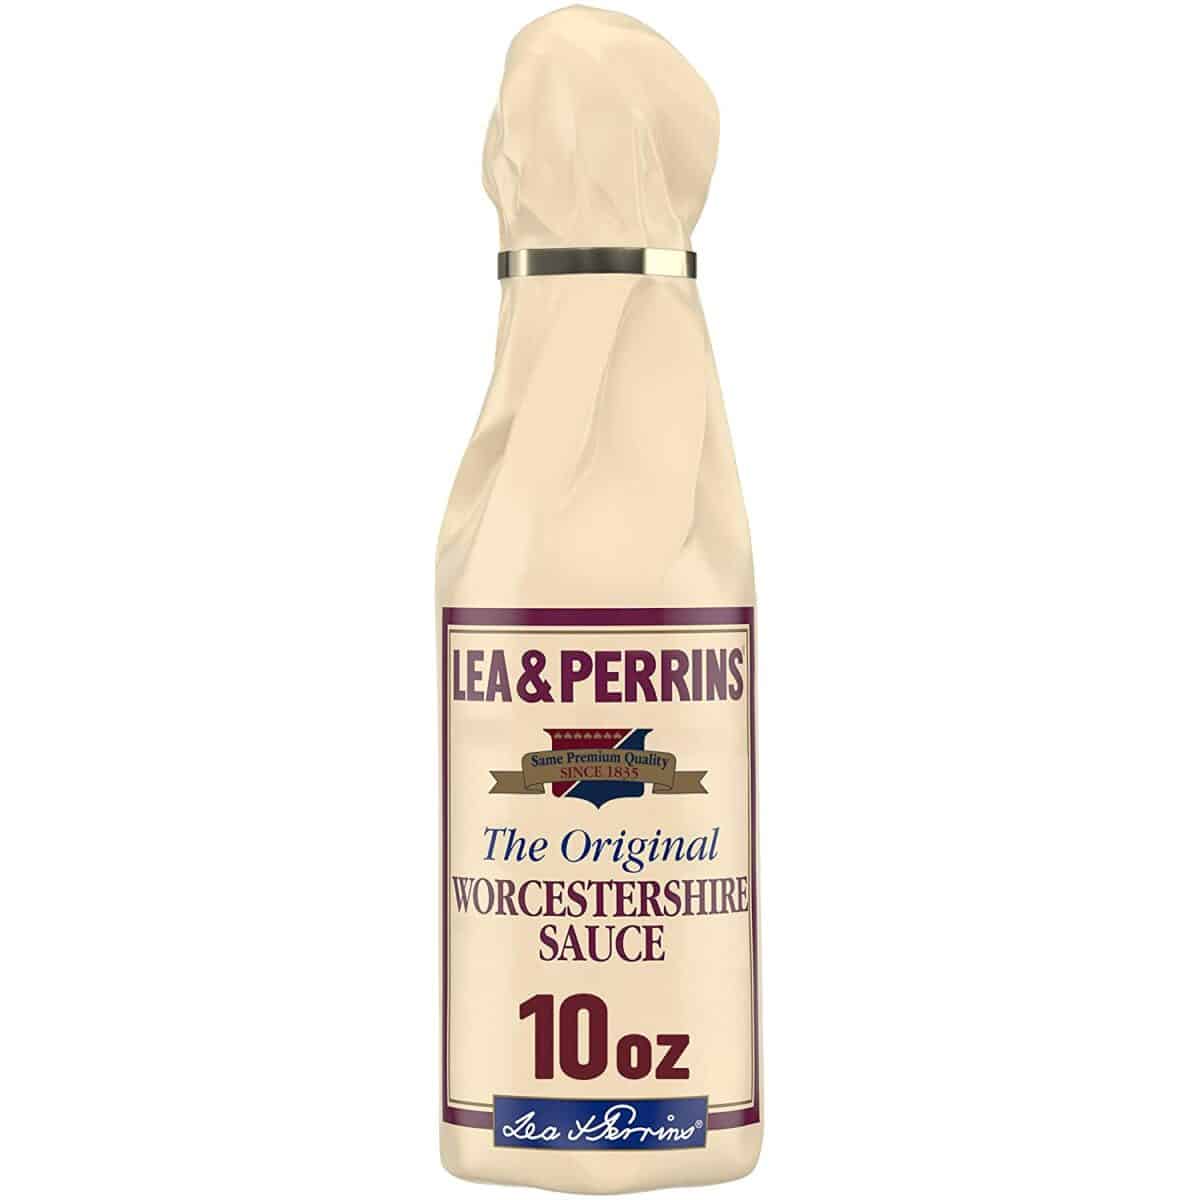 Best traditional- Lea & Perrins The Original Worcestershire Sauce